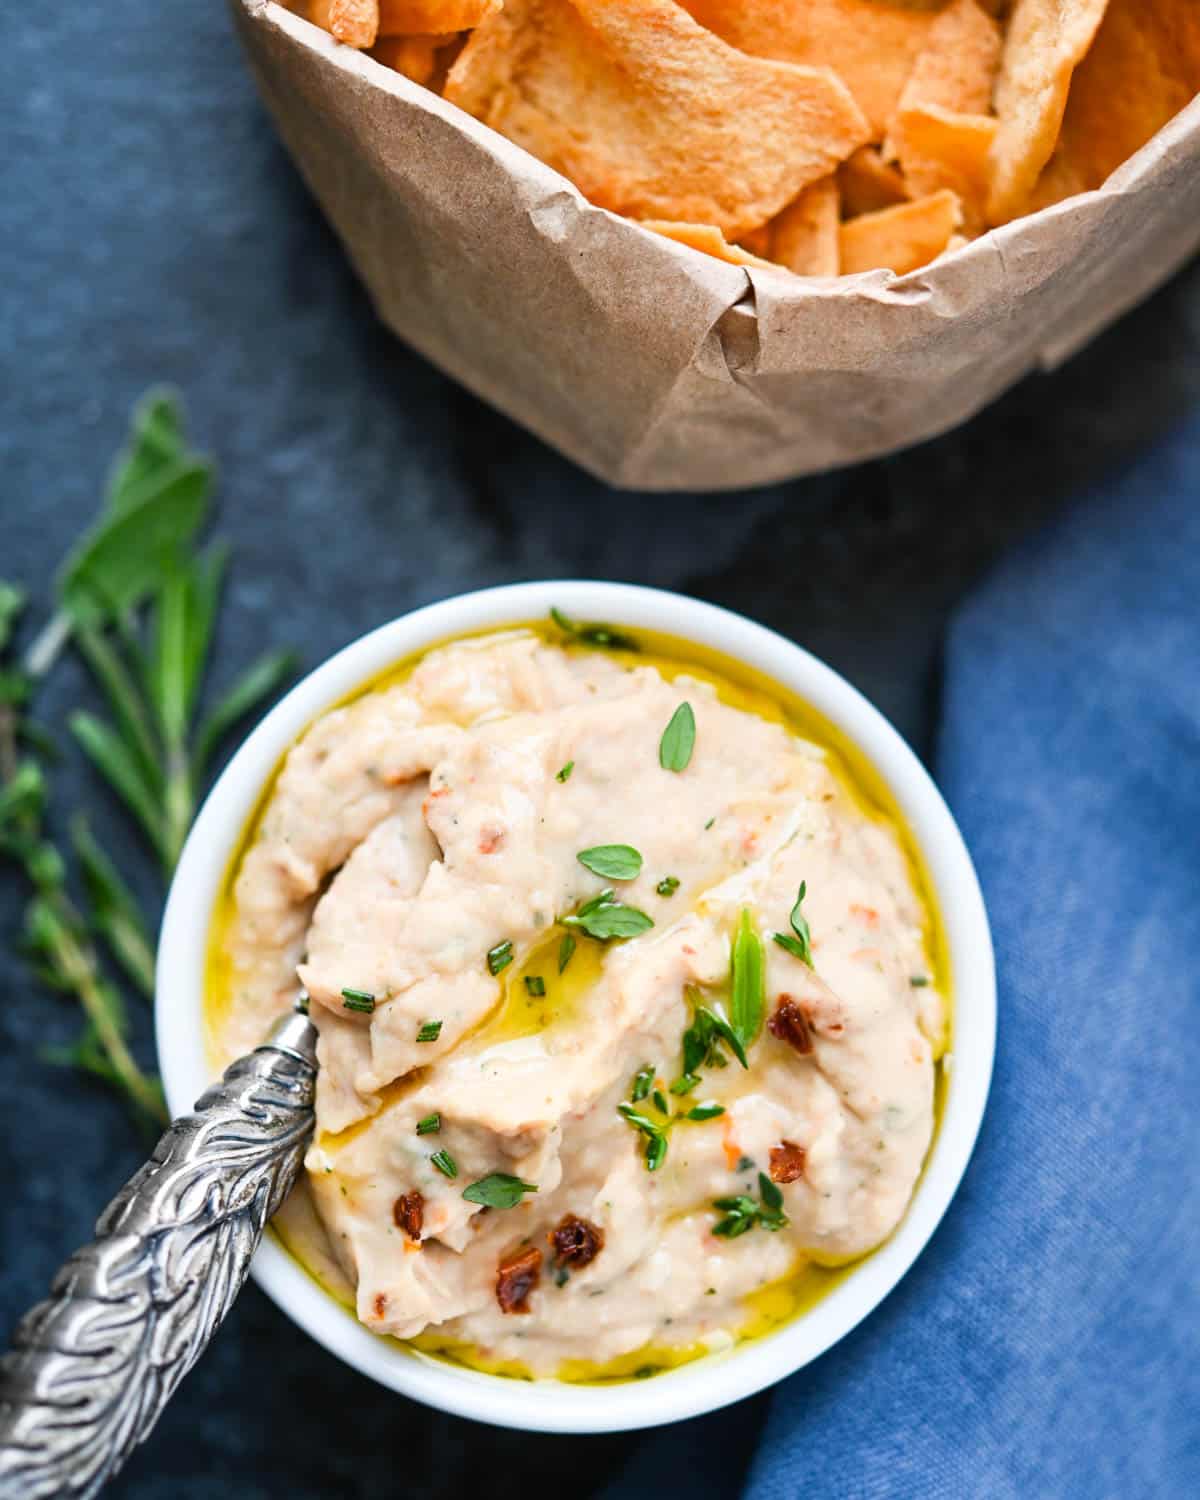 The Tuscan white bean dip with herbs and sun-dried tomatoes. 